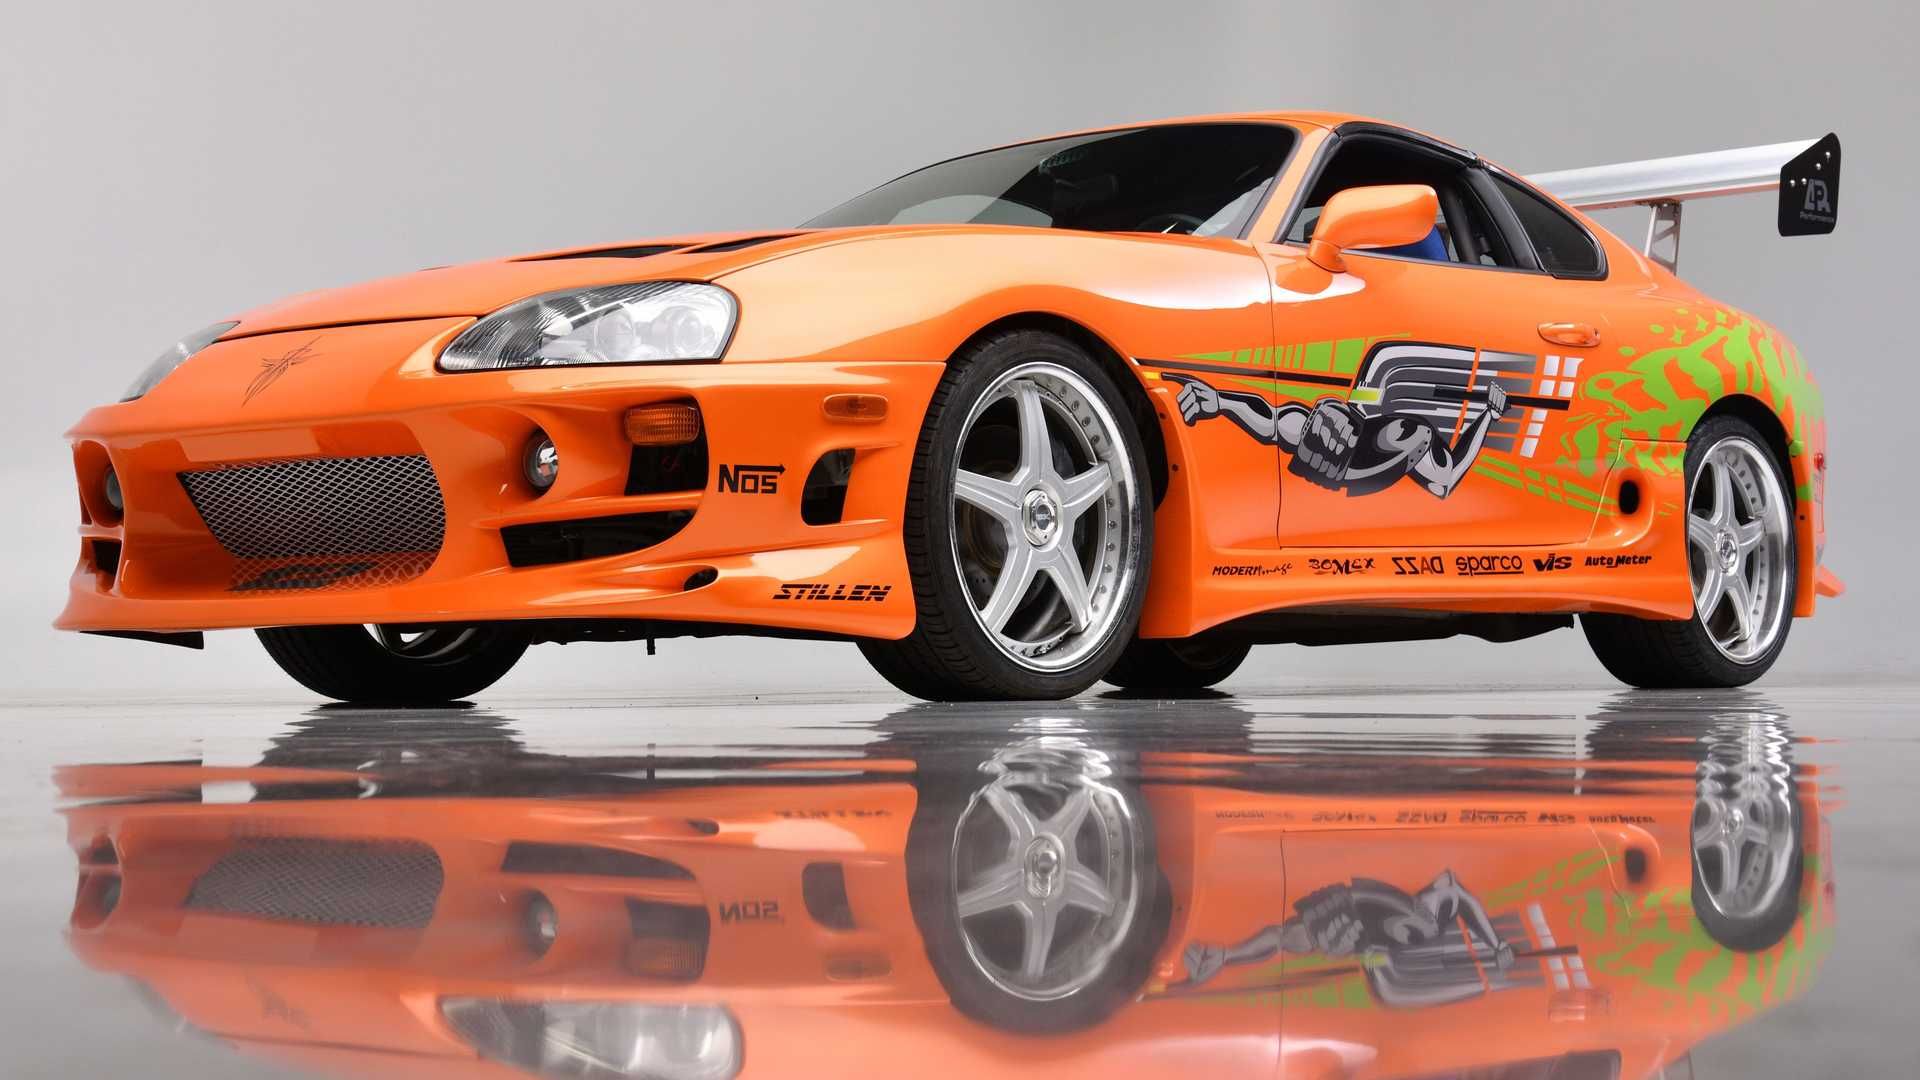 2 Fast 2 Furious Cars: How Fast Are They, Really?